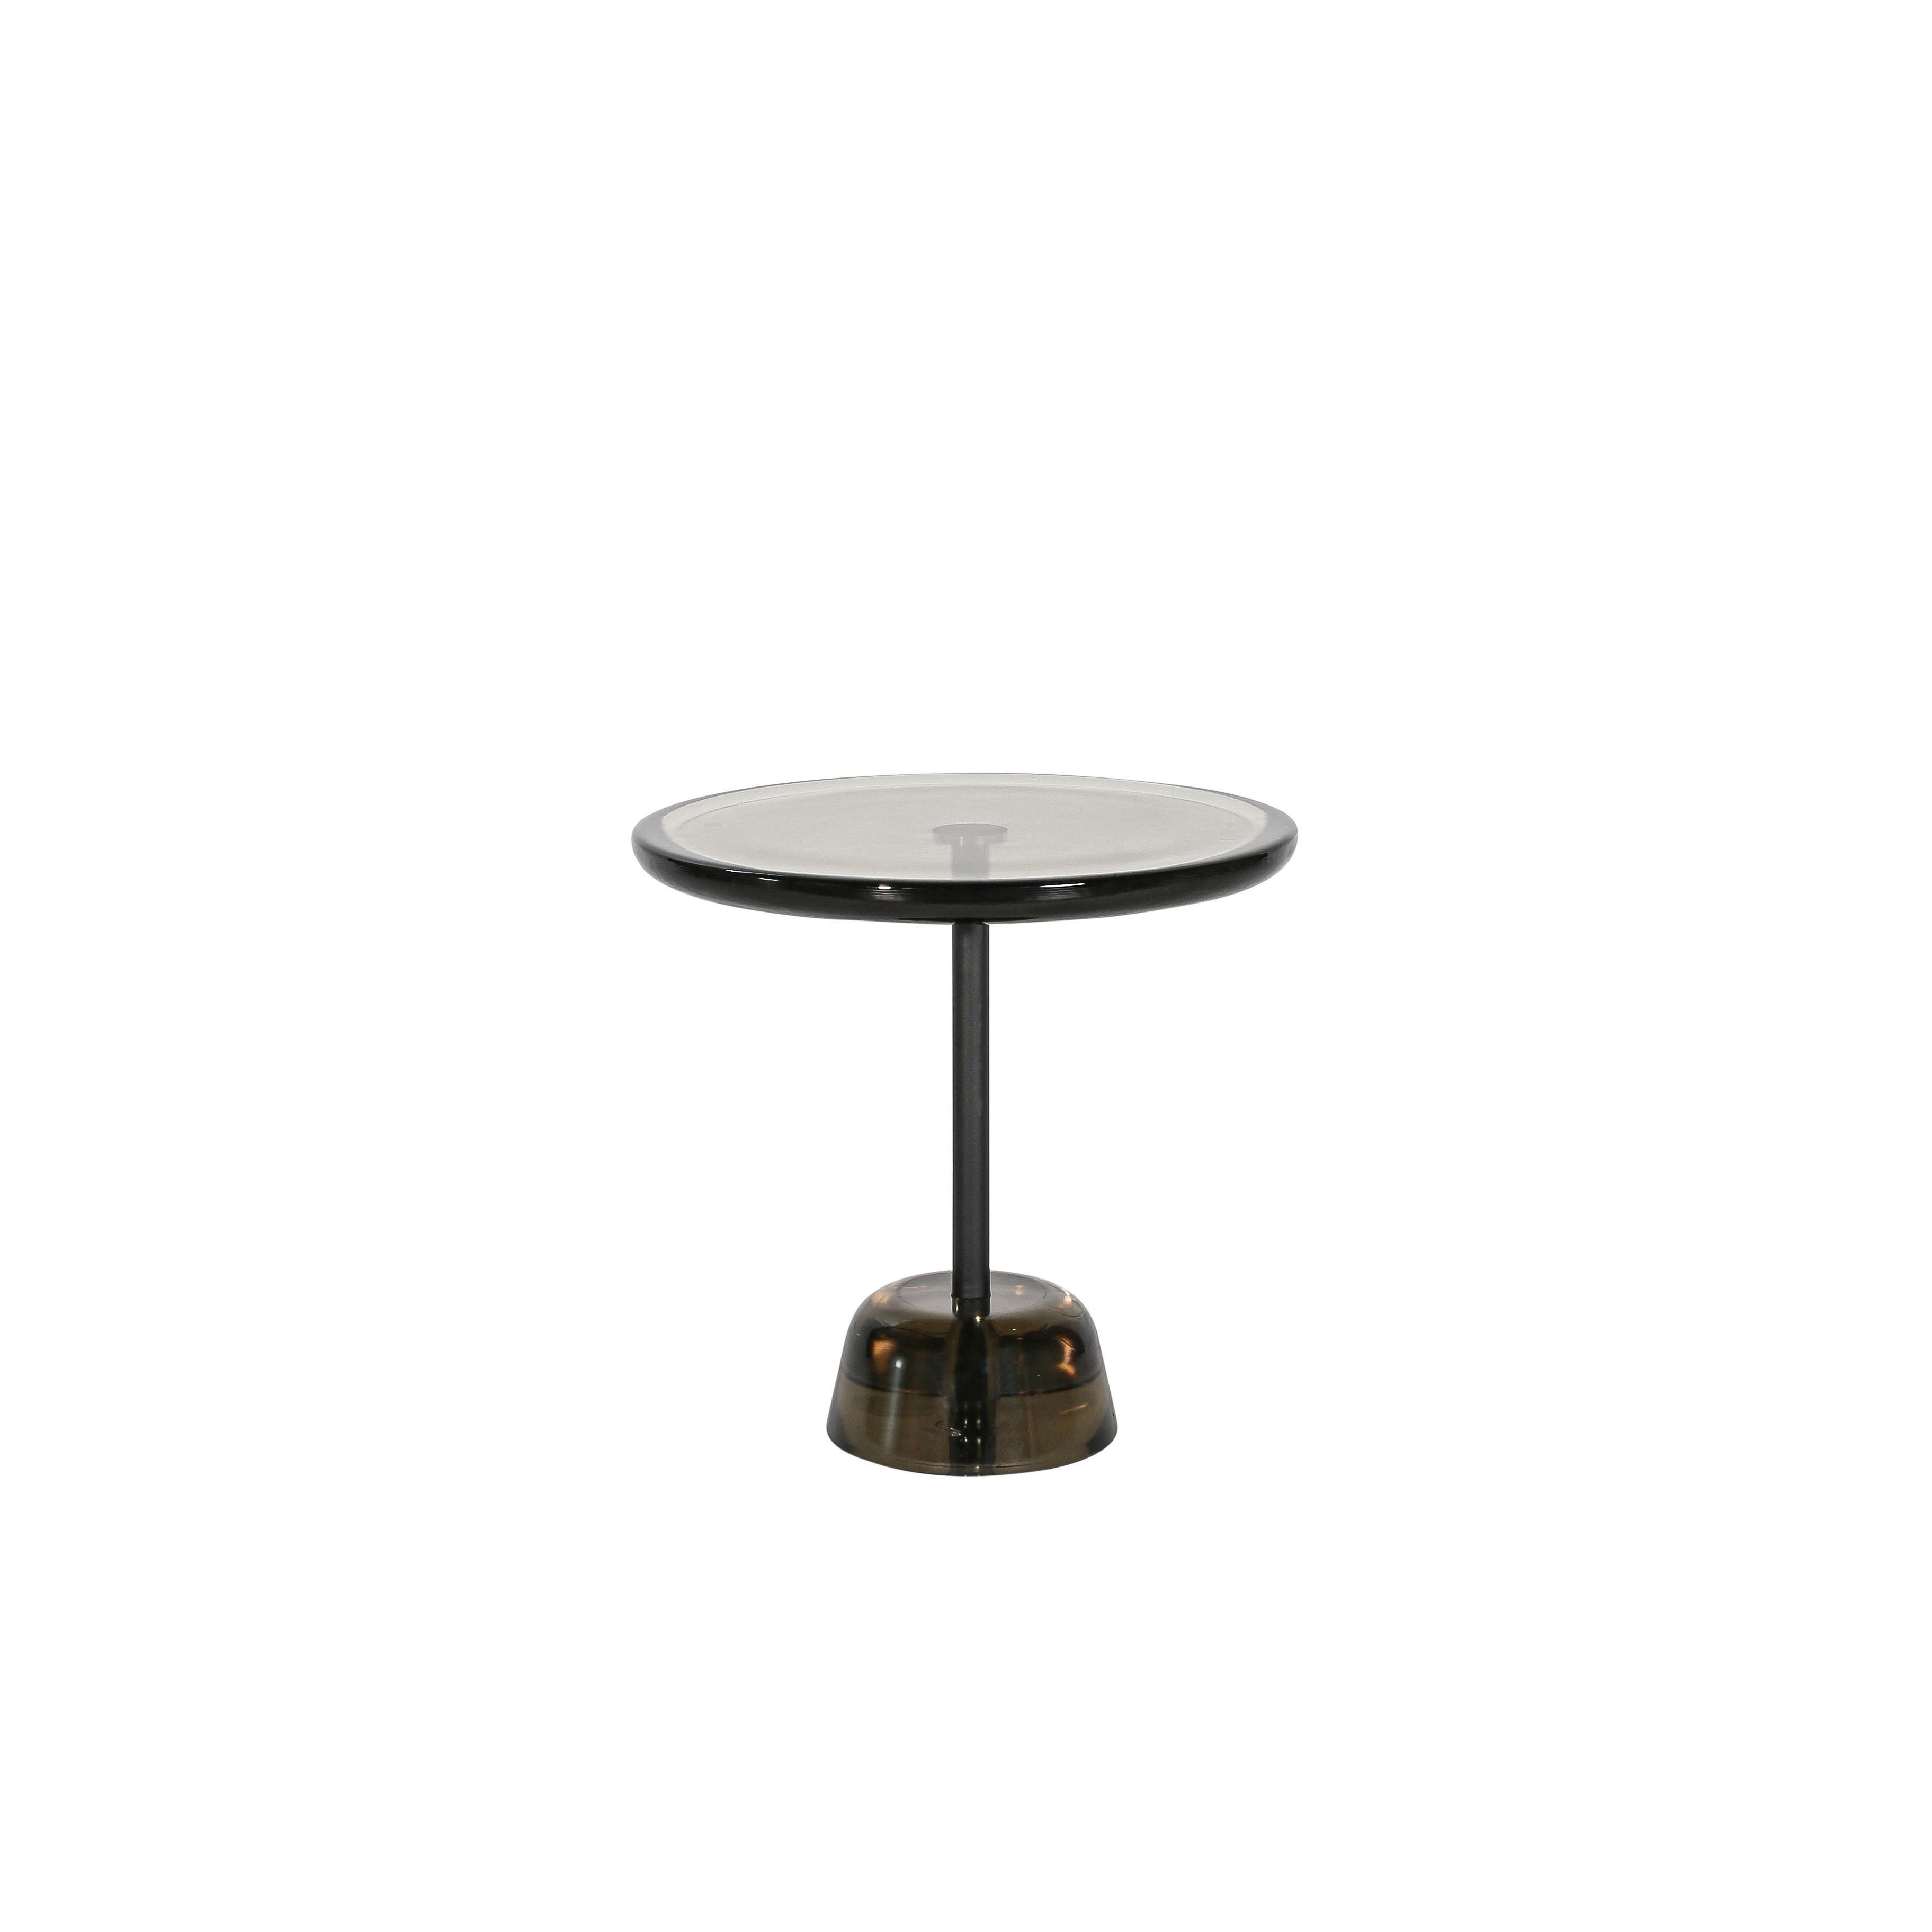 Pina Low Light Grey Black Side Table by Pulpo
Dimensions: D44 x H42 cm
Materials: glass; brass and steel

Also available in different colours. Please contact us.

Sebastian Herkner’s distinctively tall, skinny side table series pina is inspired by